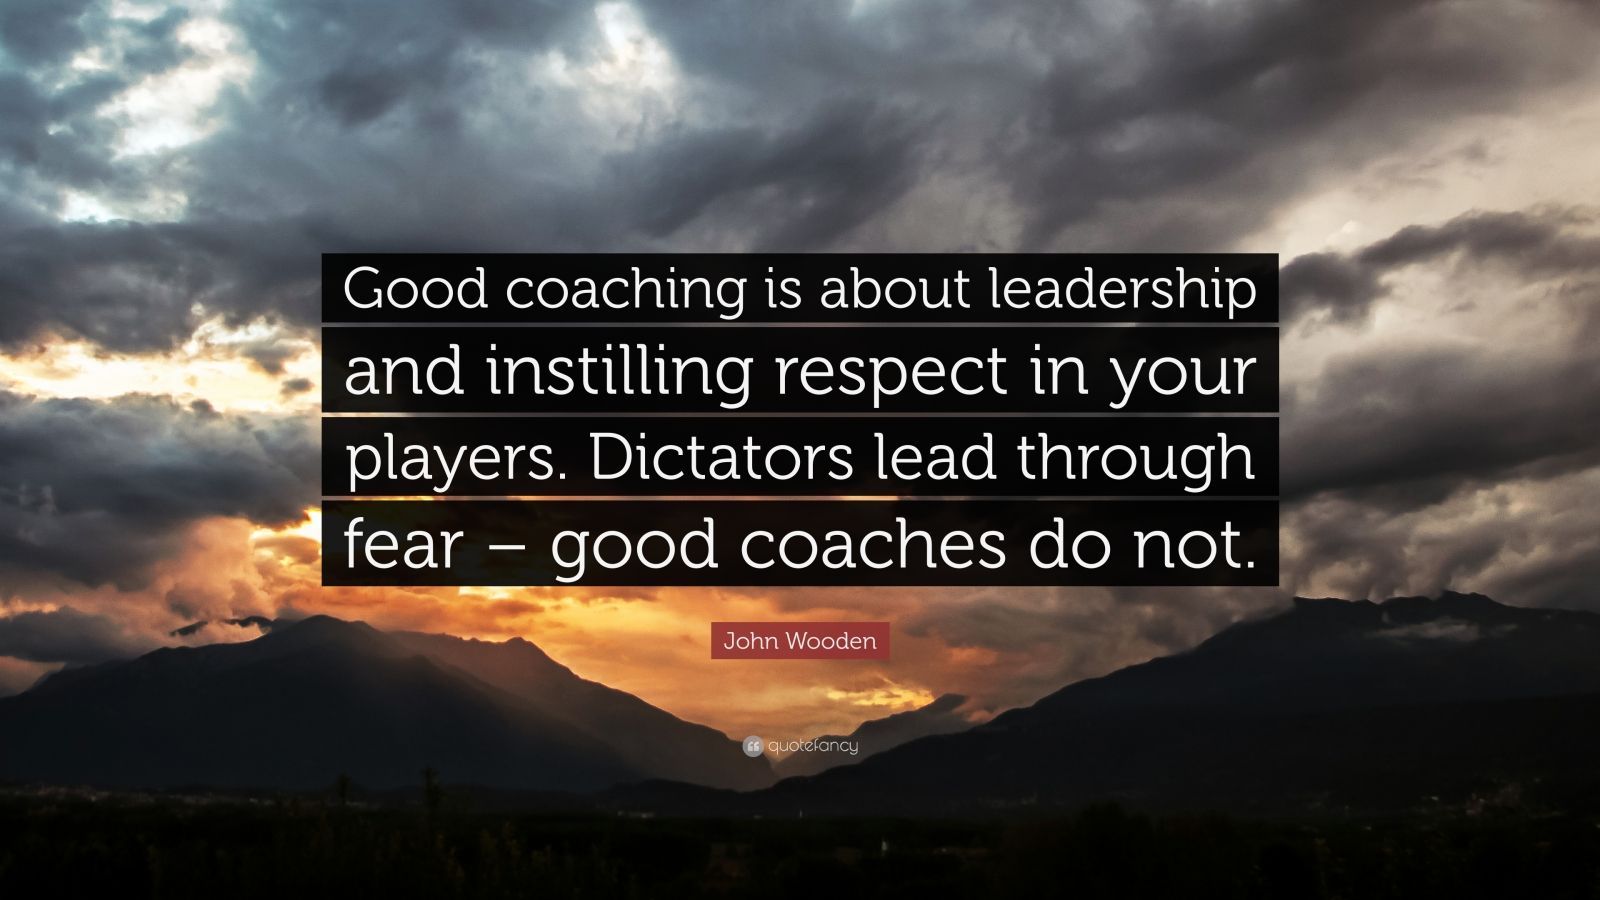 John Wooden Quote: “Good coaching is about leadership and instilling